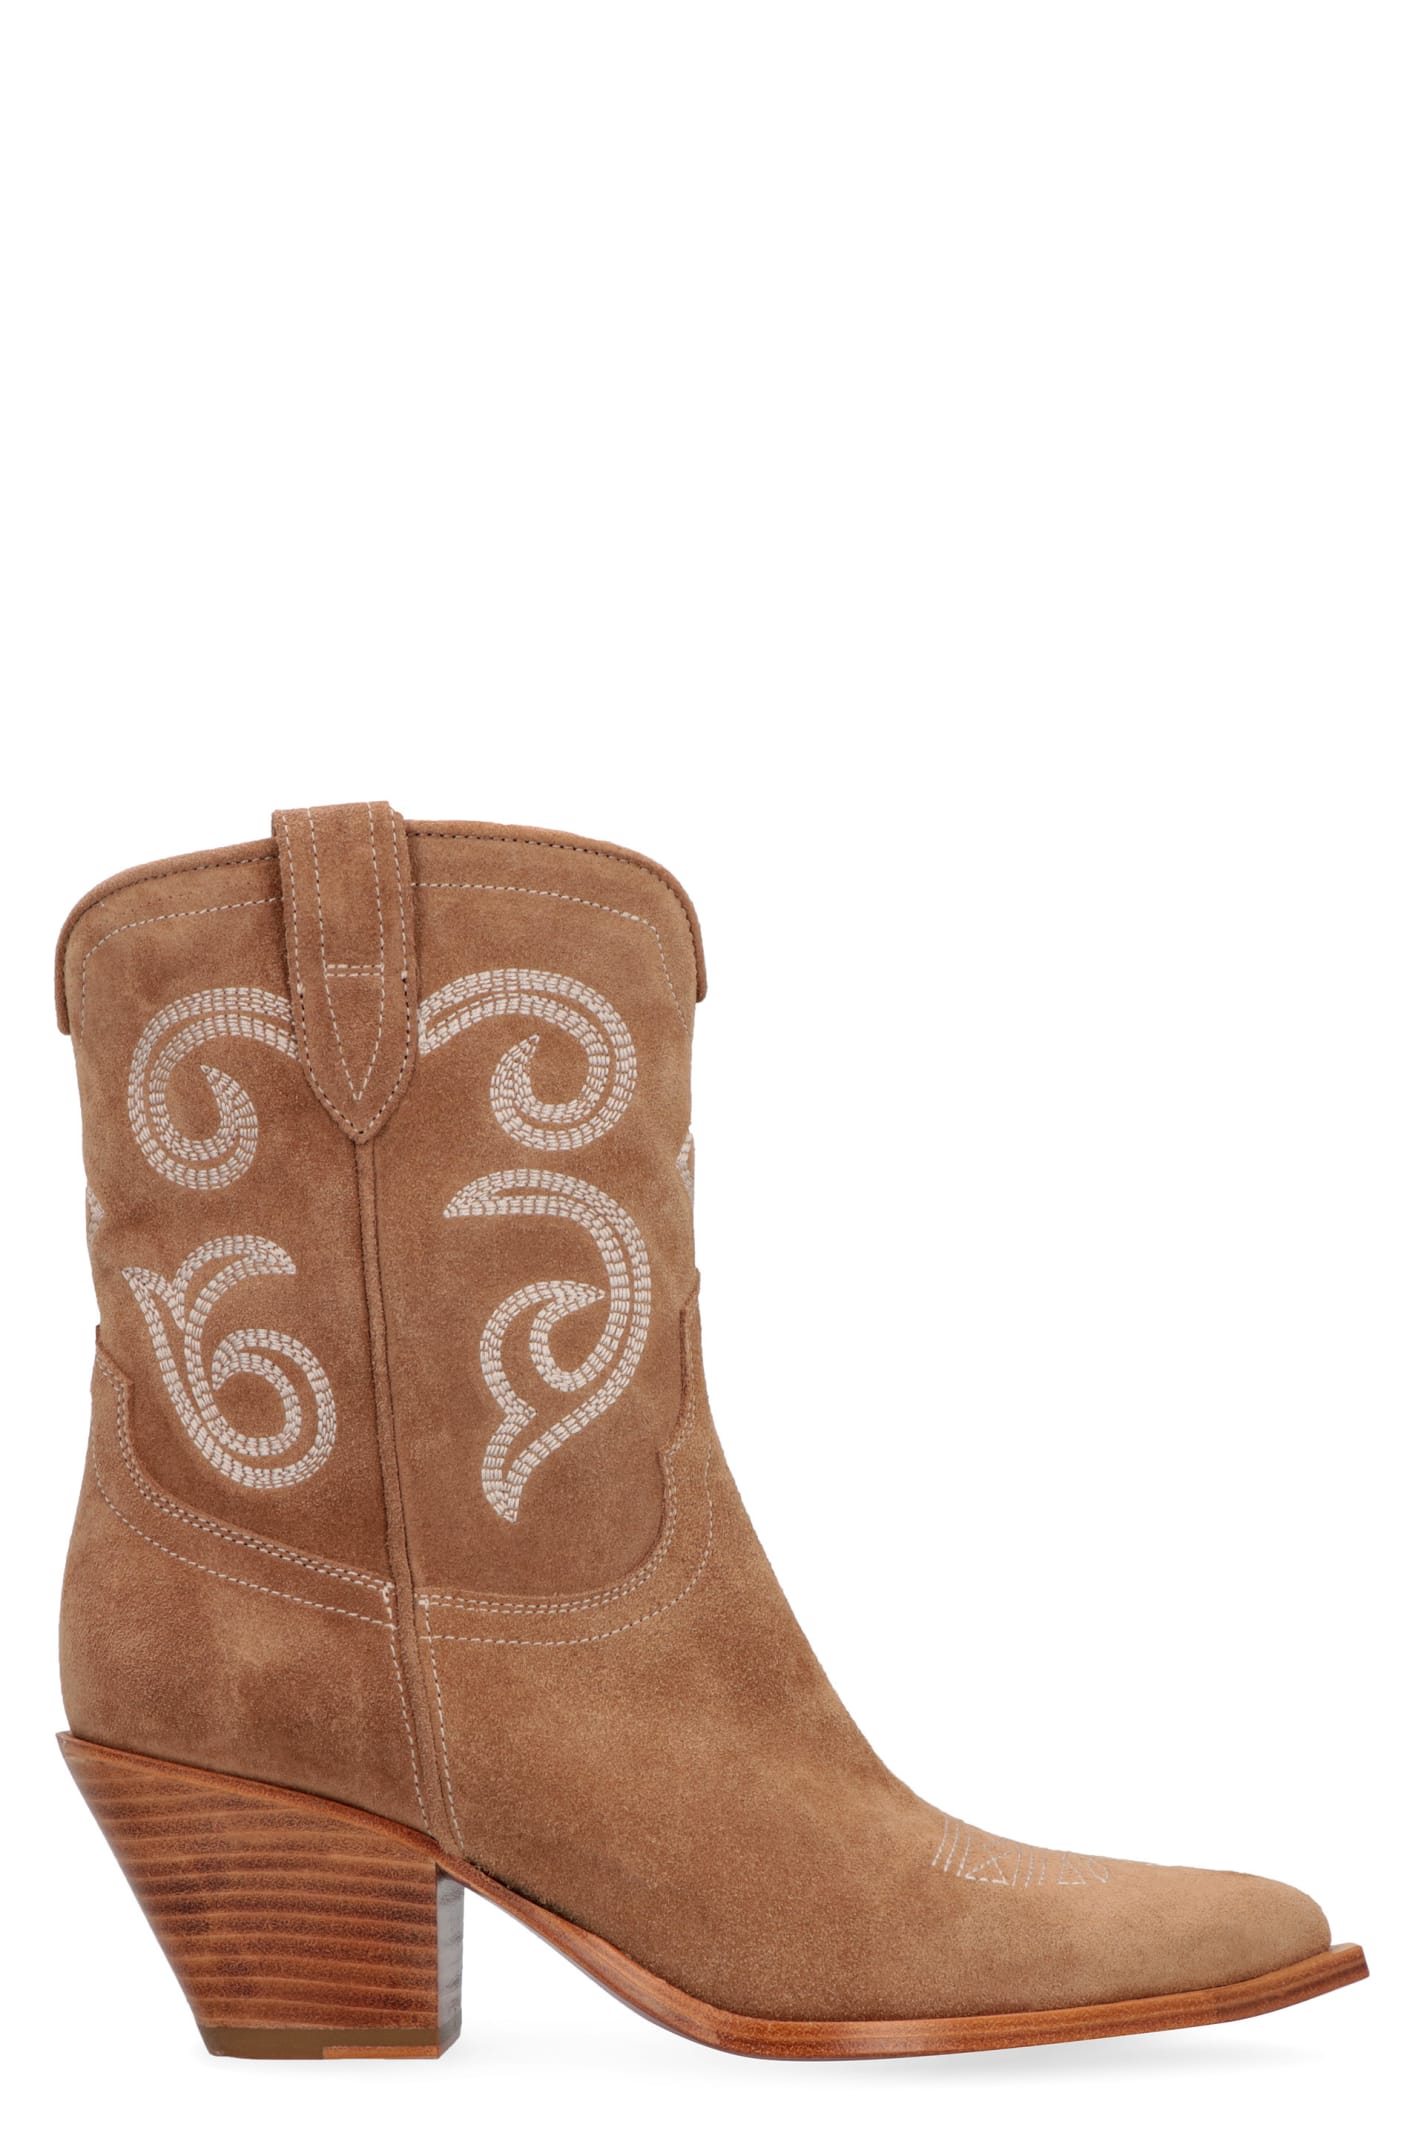 Sonora Perla Western-style Boots